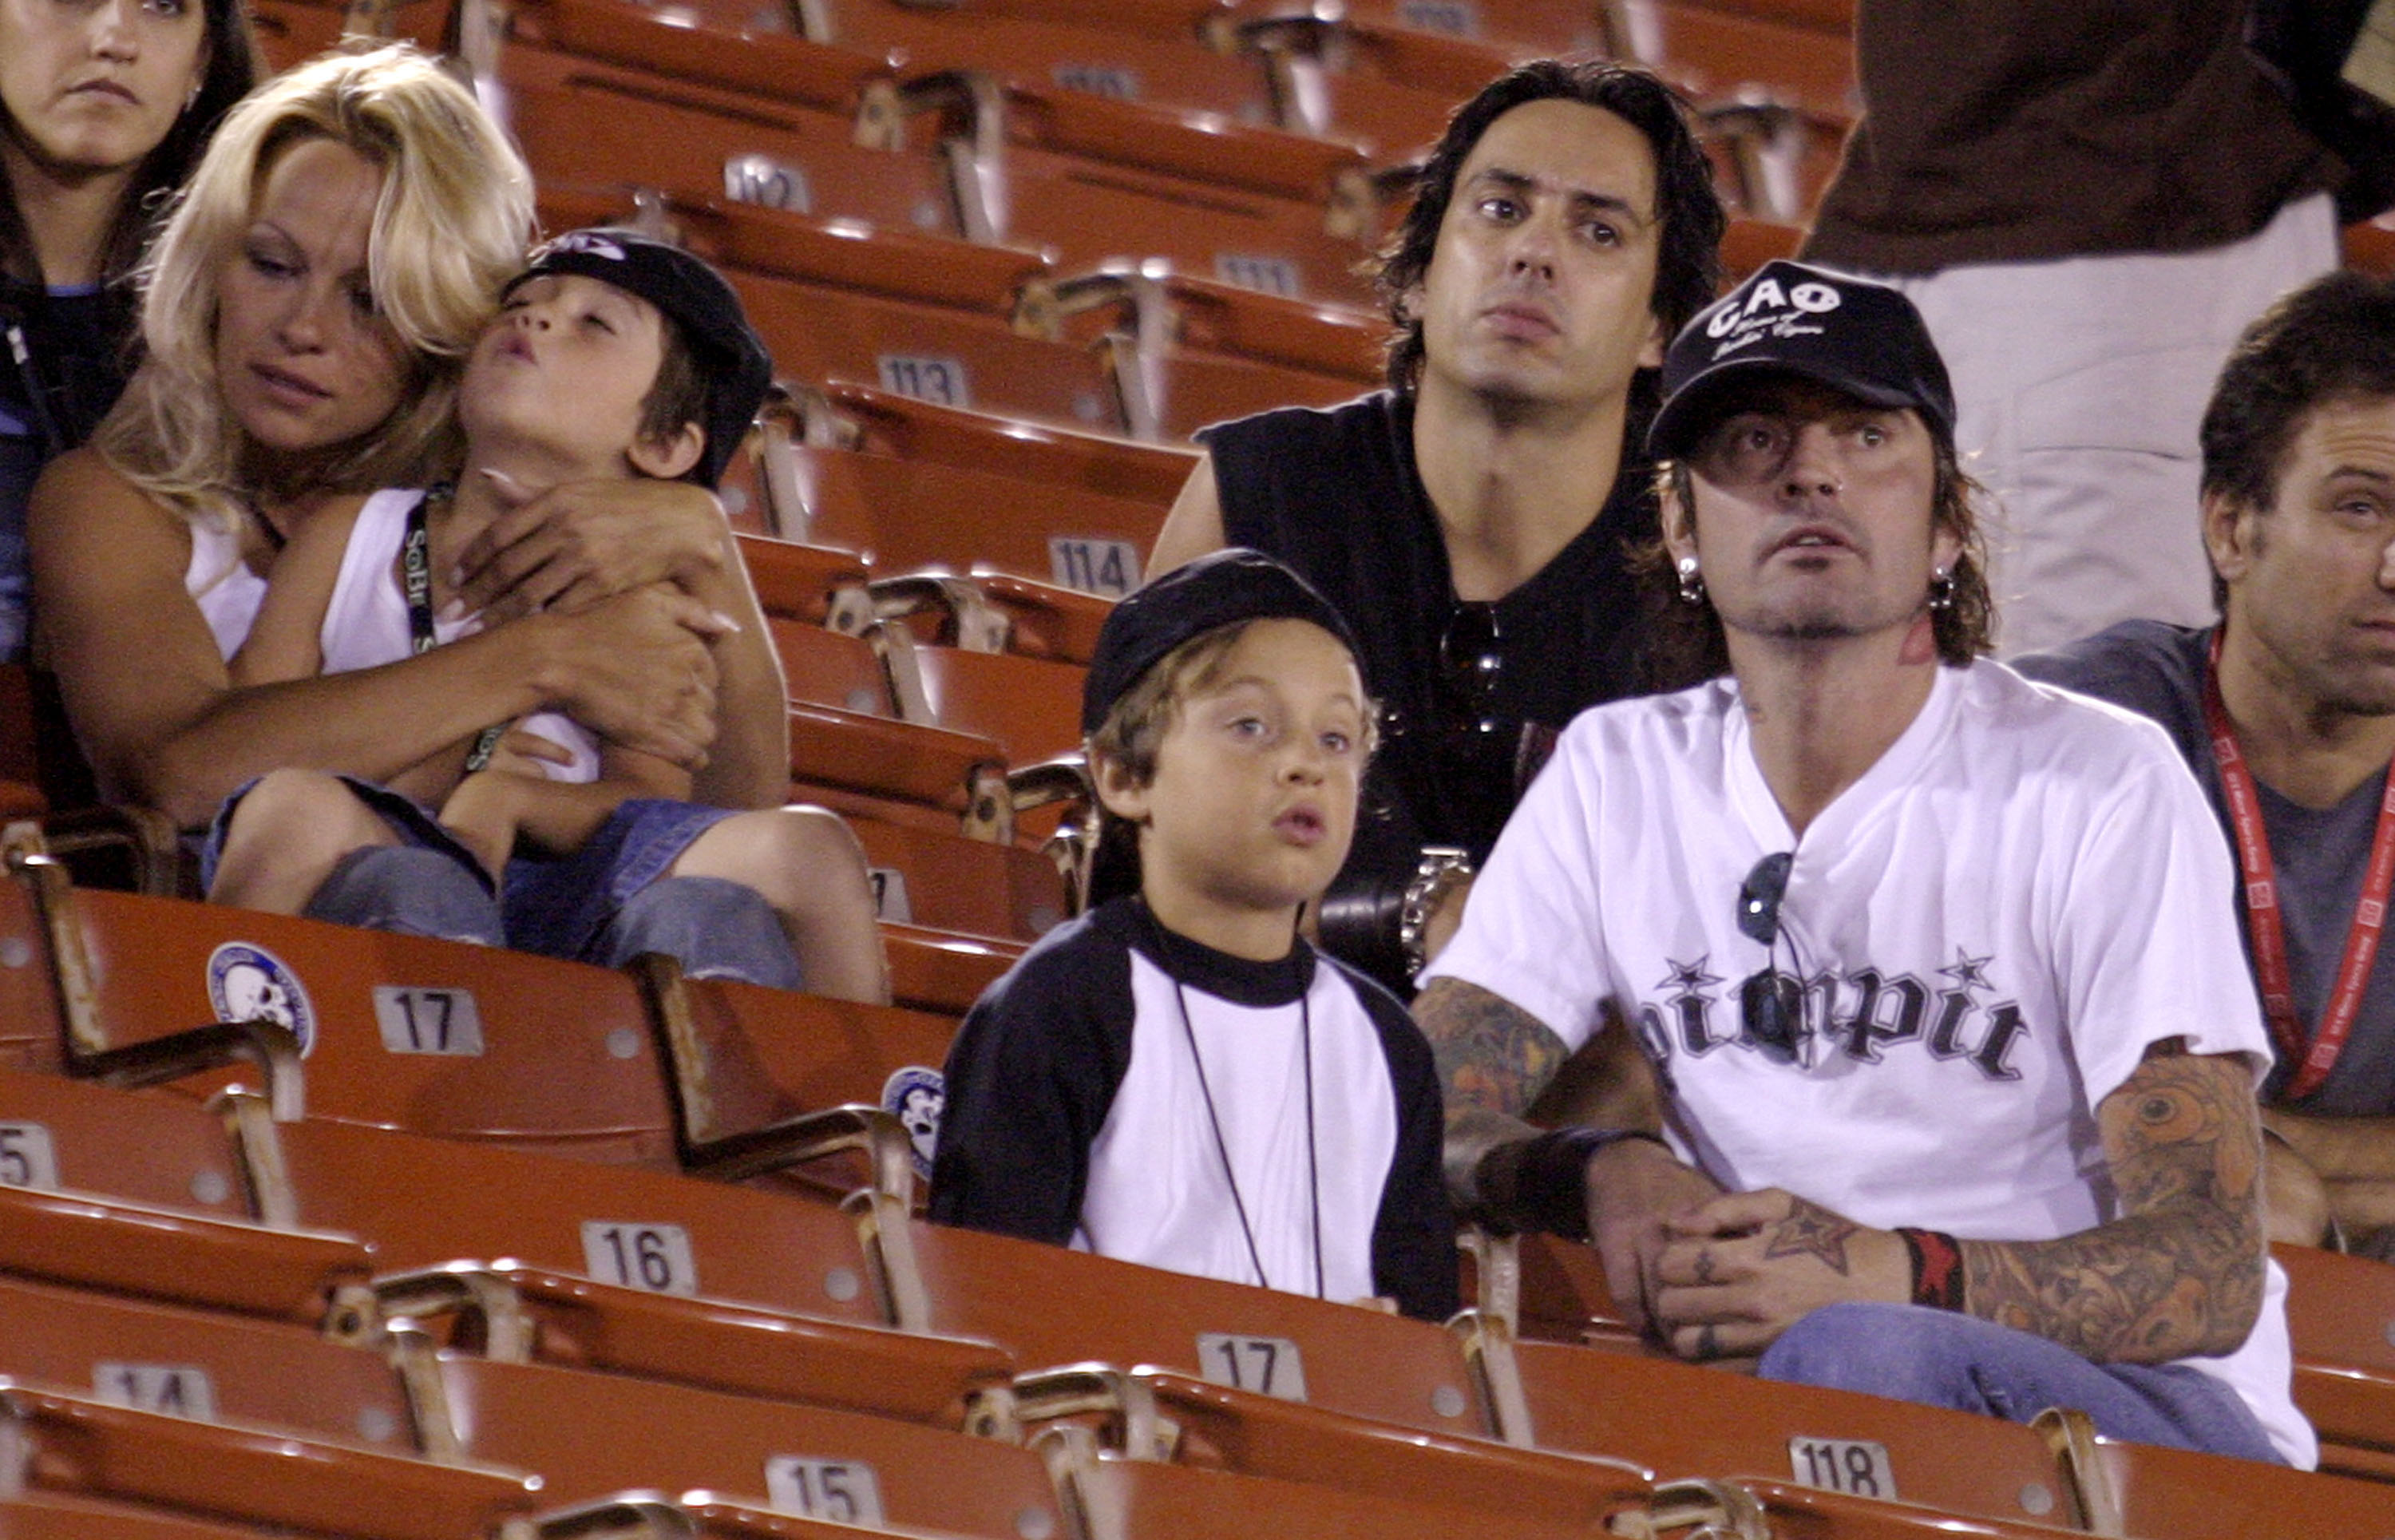 Pamela Anderson and Tommy Lee with Brandon and Dylan watching the X Games - Moto X Freestyle competition at the AL Coliseum in Los Angeles, California  on August 16, 2003 | Source: Getty Images